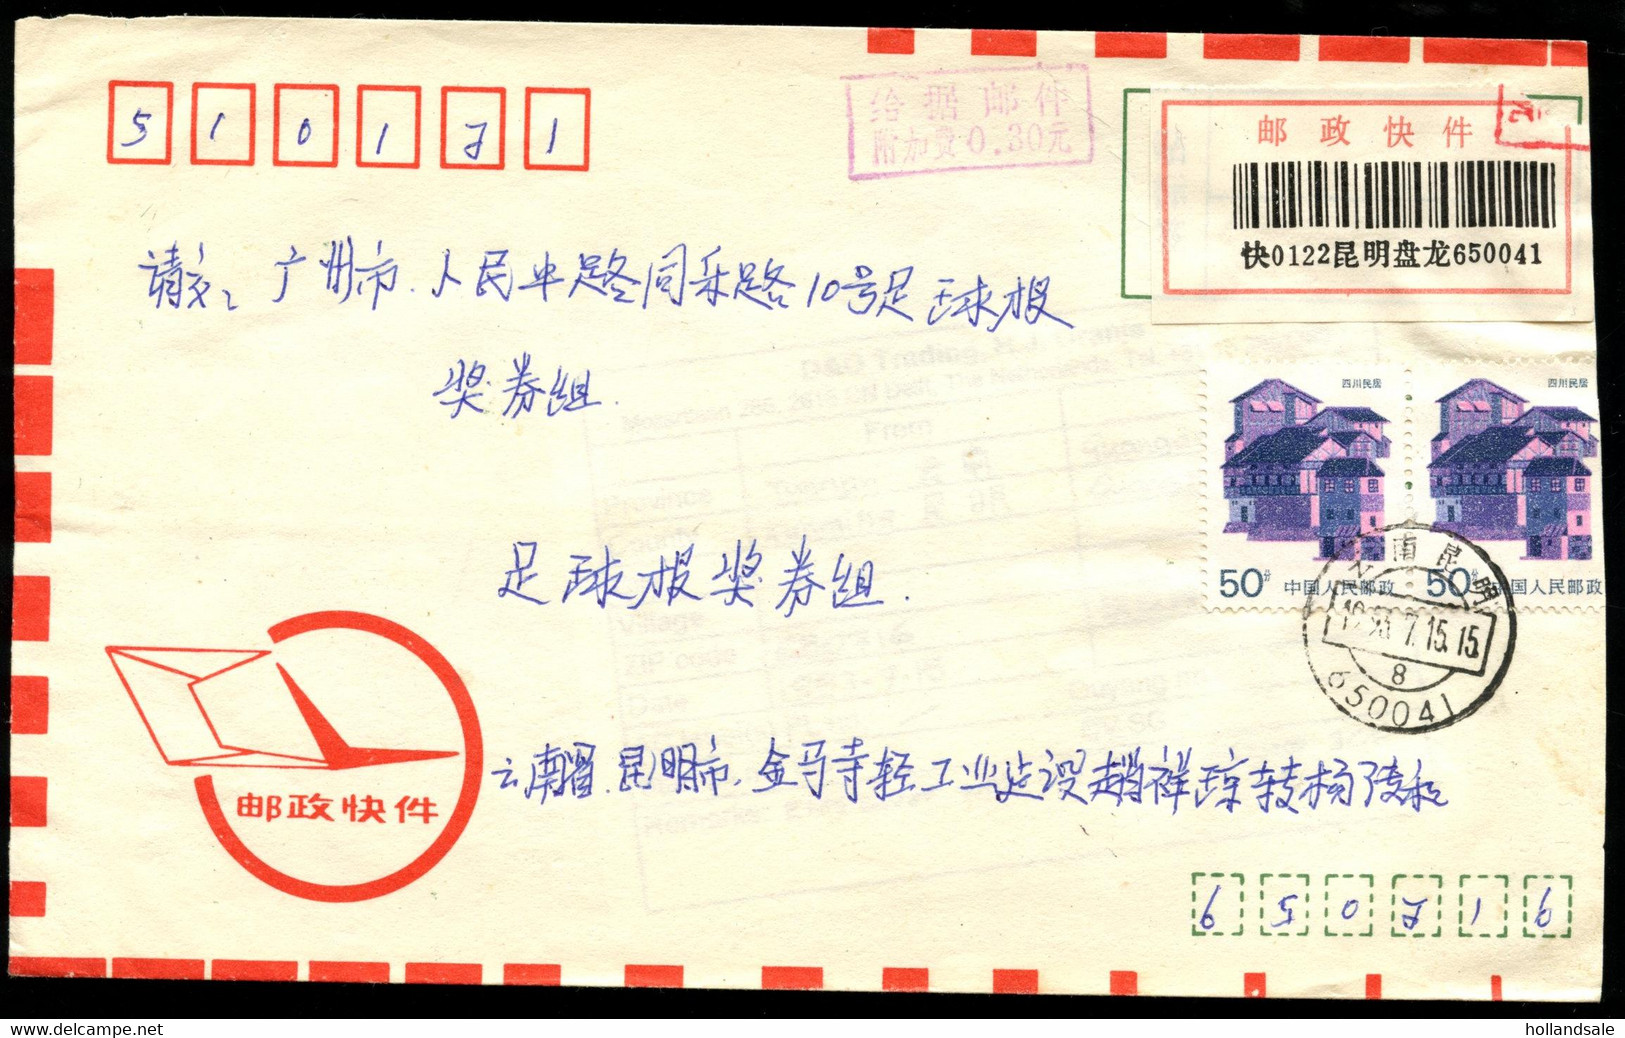 CHINA PRC / ADDED CHARGE LABELS -Letter Sent From Kunming To Guabgzhou. Red-violet AC Chop Of 30f - Impuestos